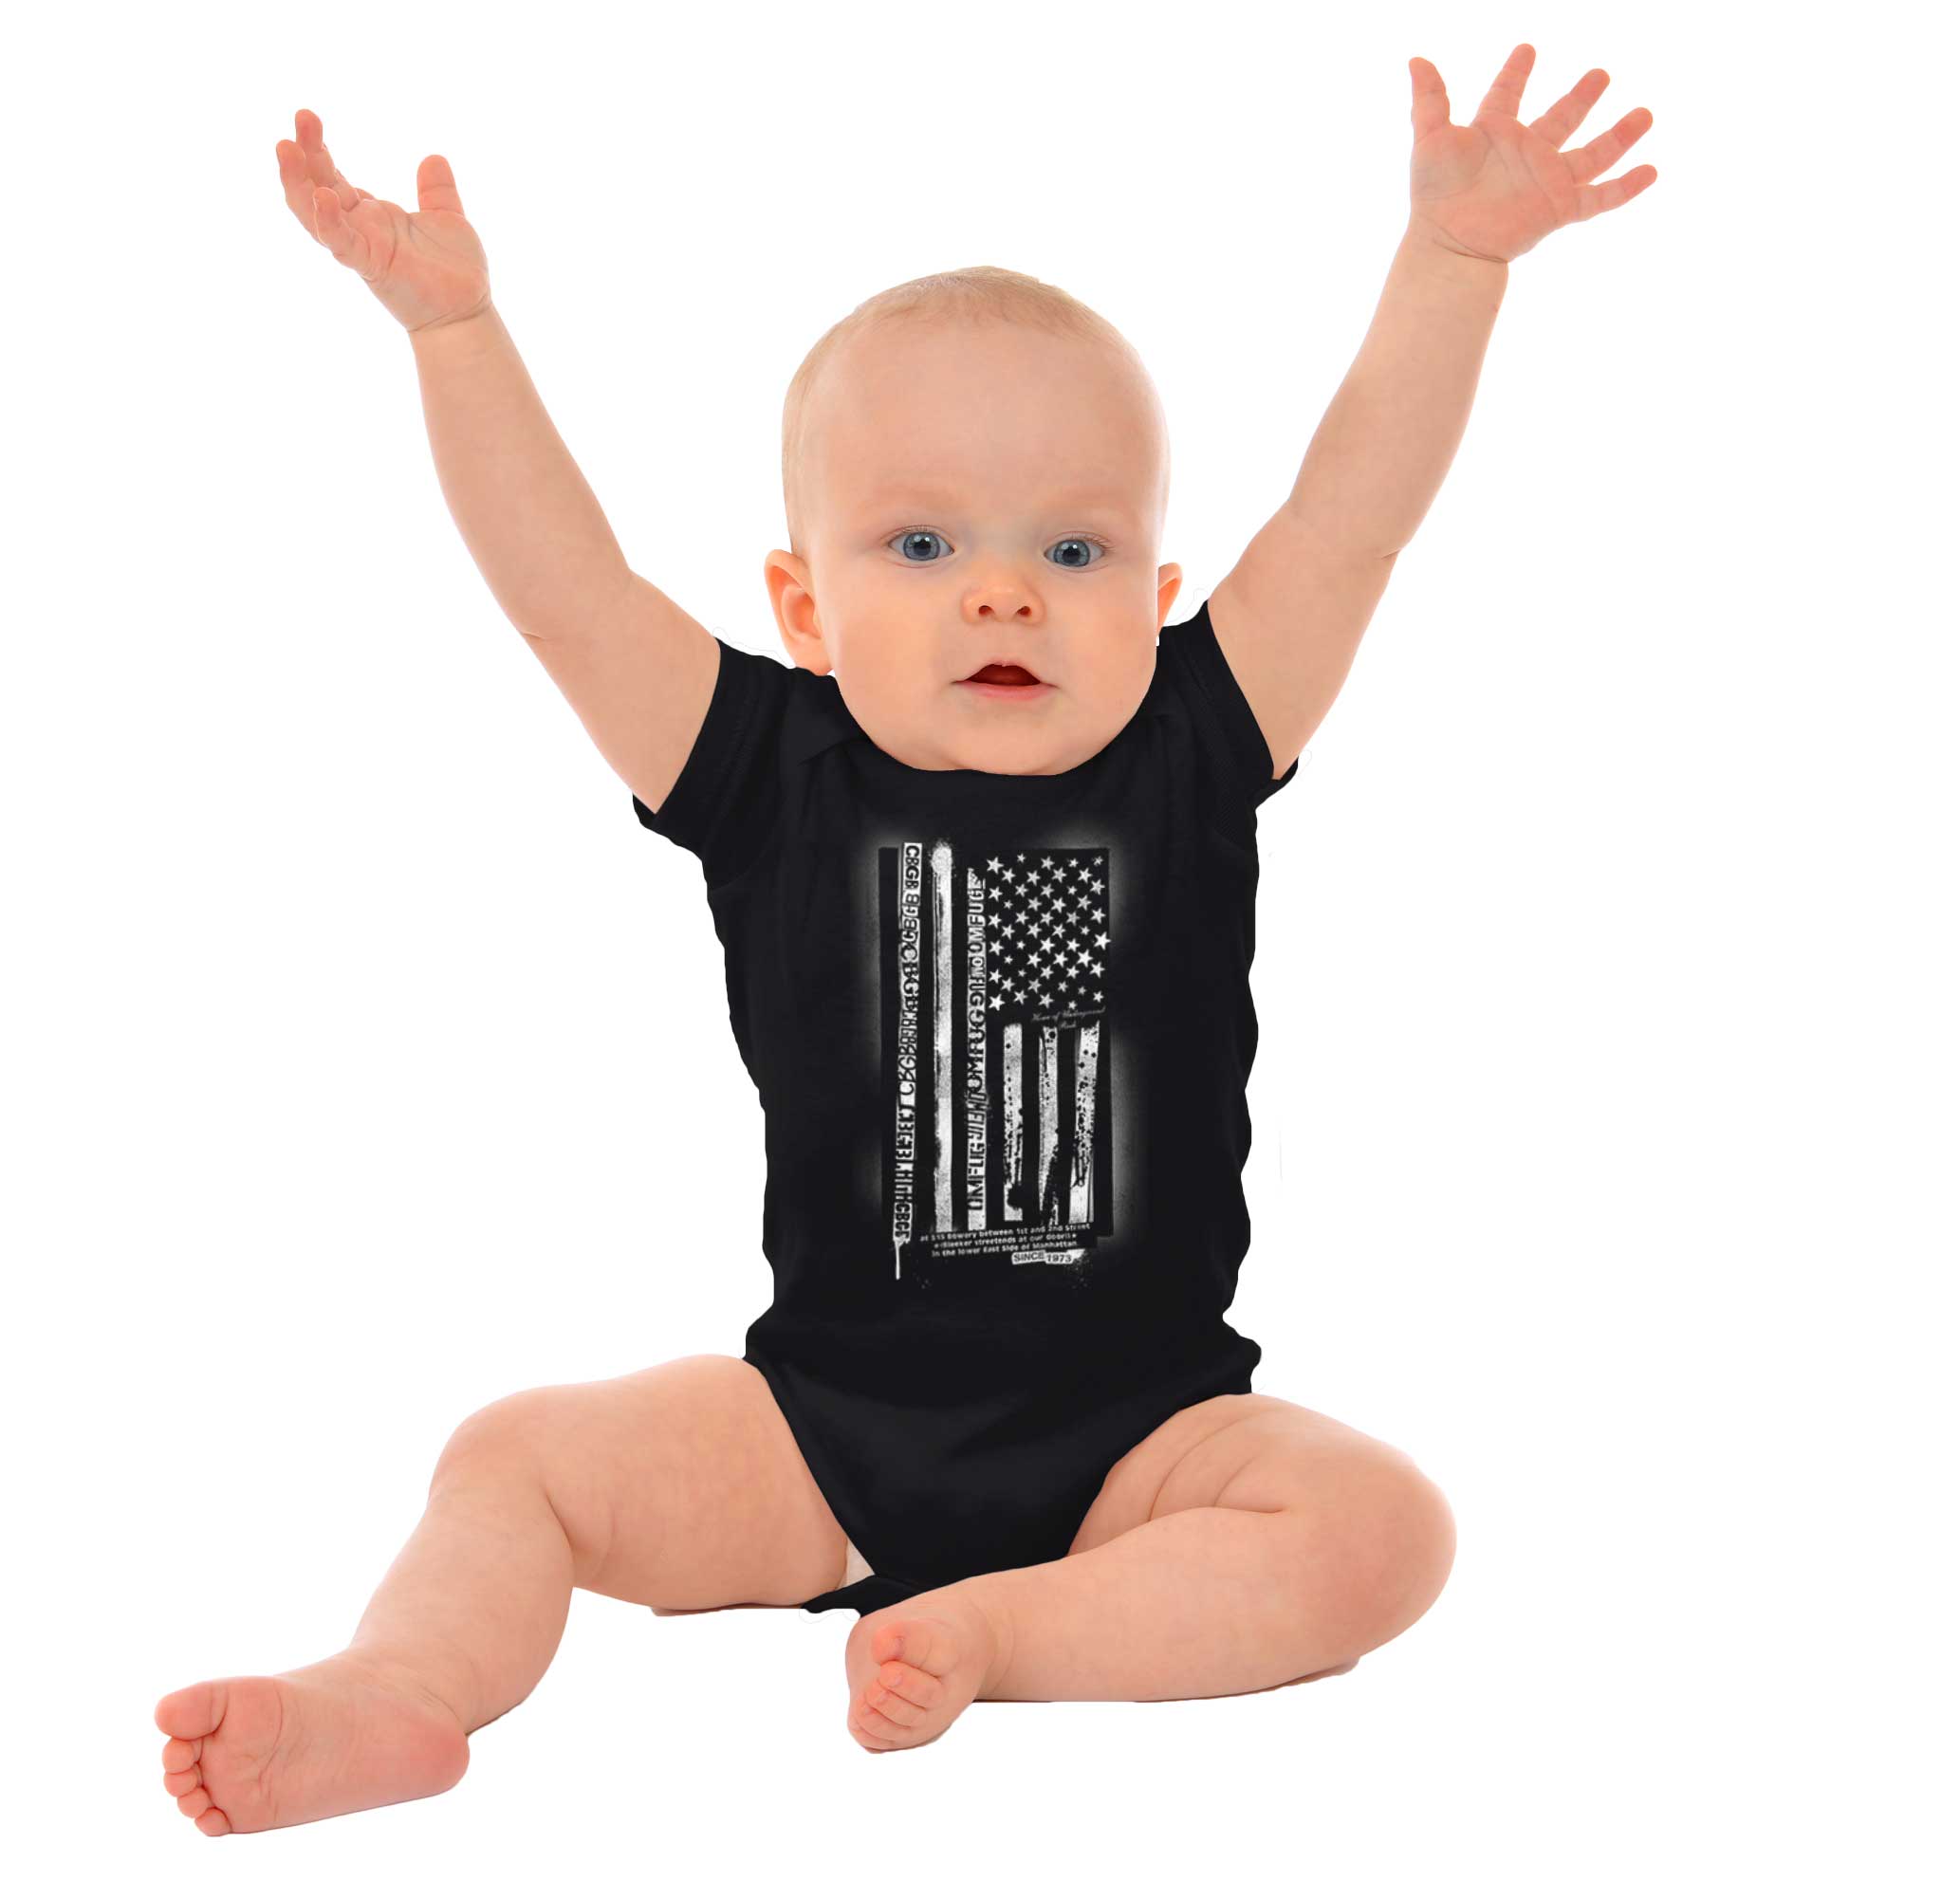 CBGB United States Of Punk Rock American Romper Boys or Girls Infant Baby Brisco Brands 12M - image 3 of 6